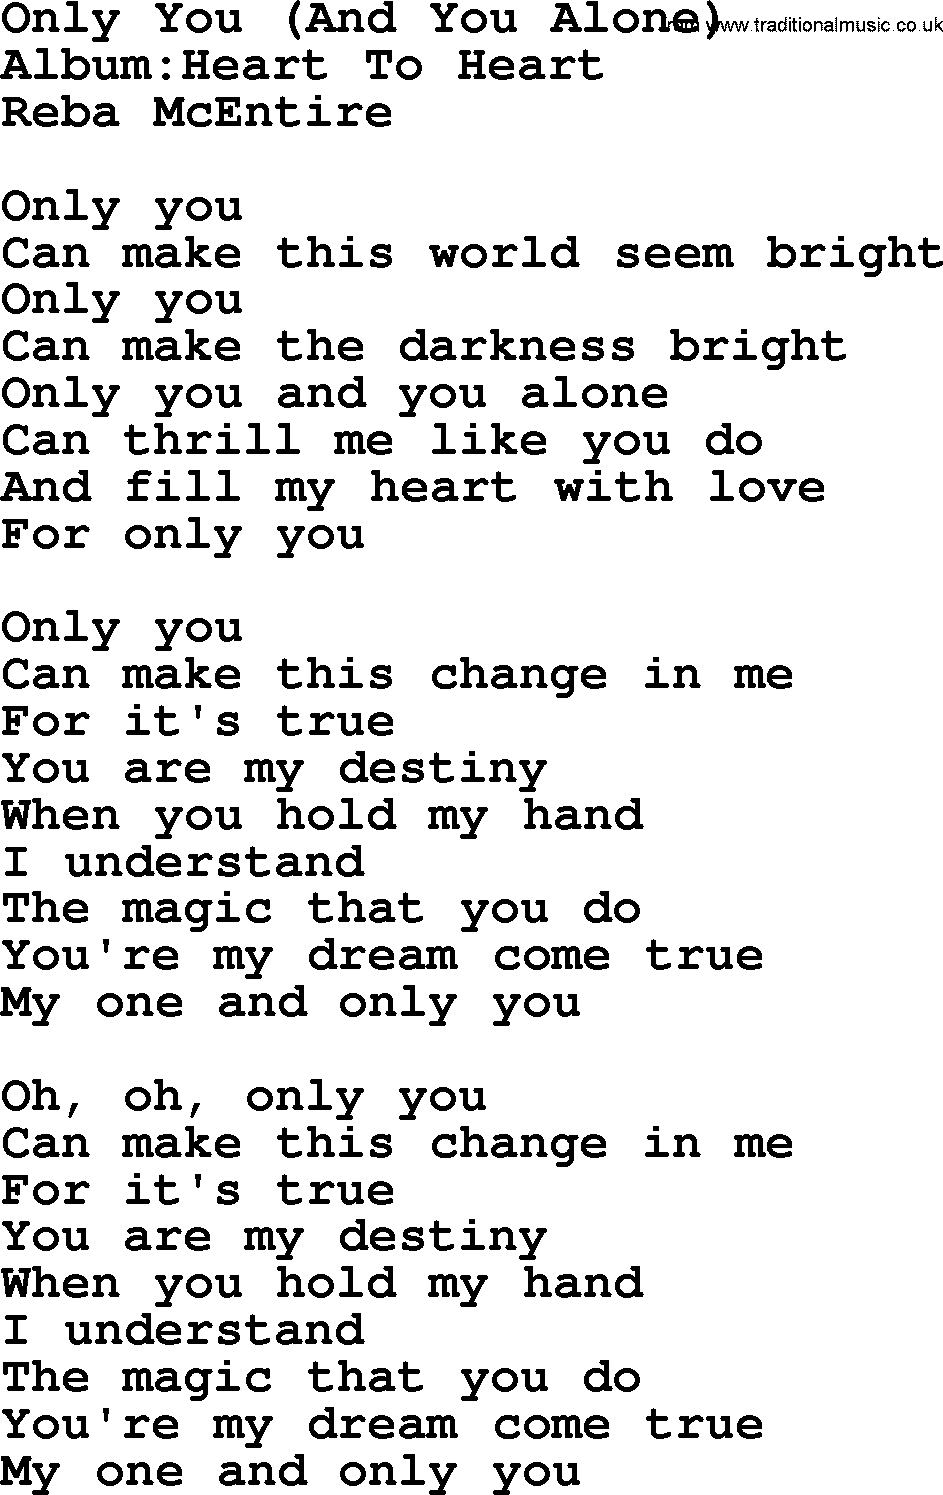 Reba McEntire song: Only You, And You Alone lyrics